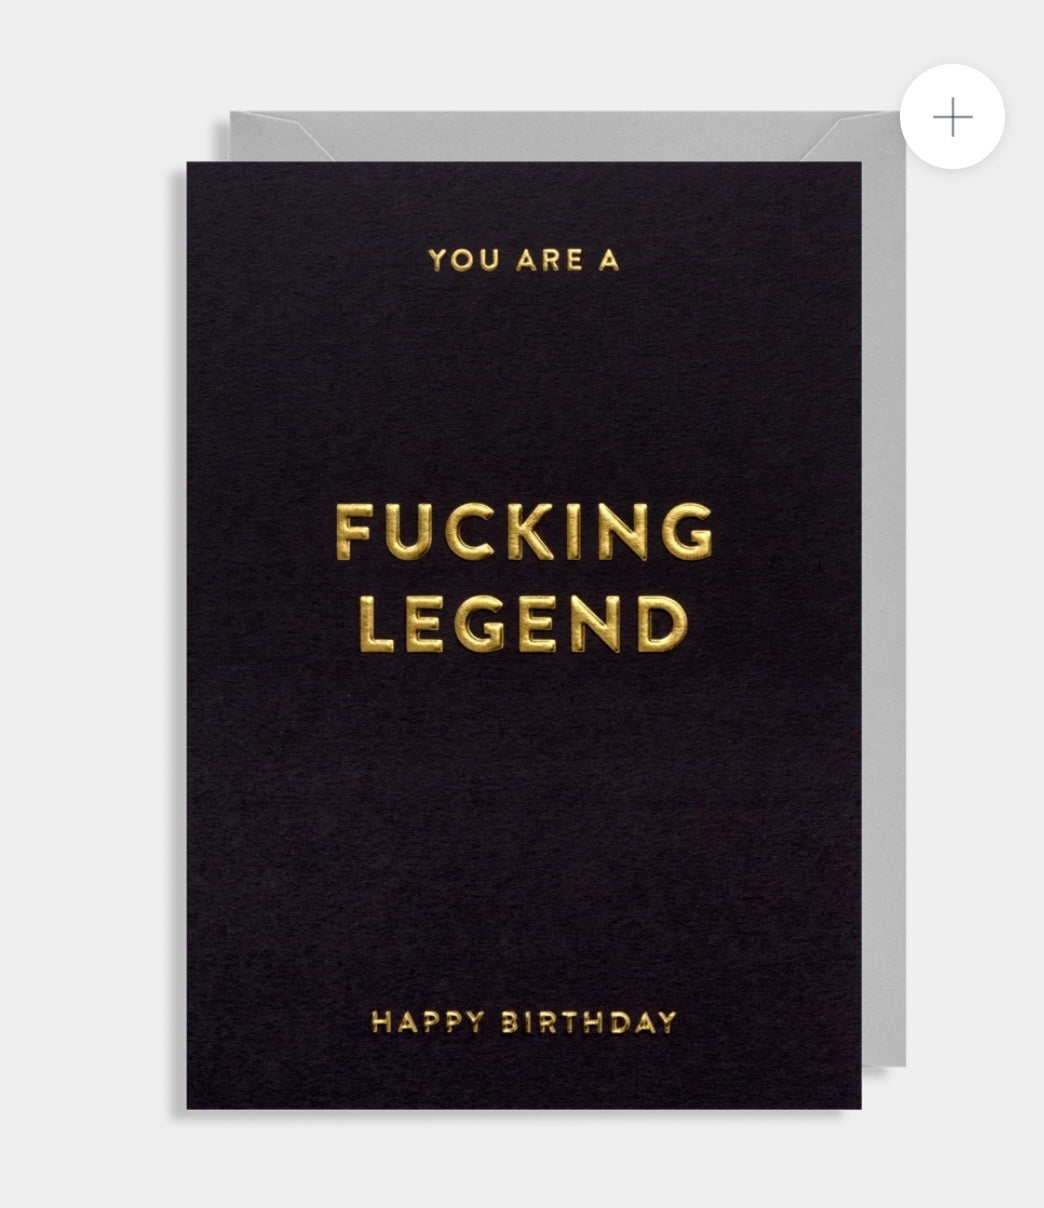 You Are A F**king Legend - Happy Birthday Card